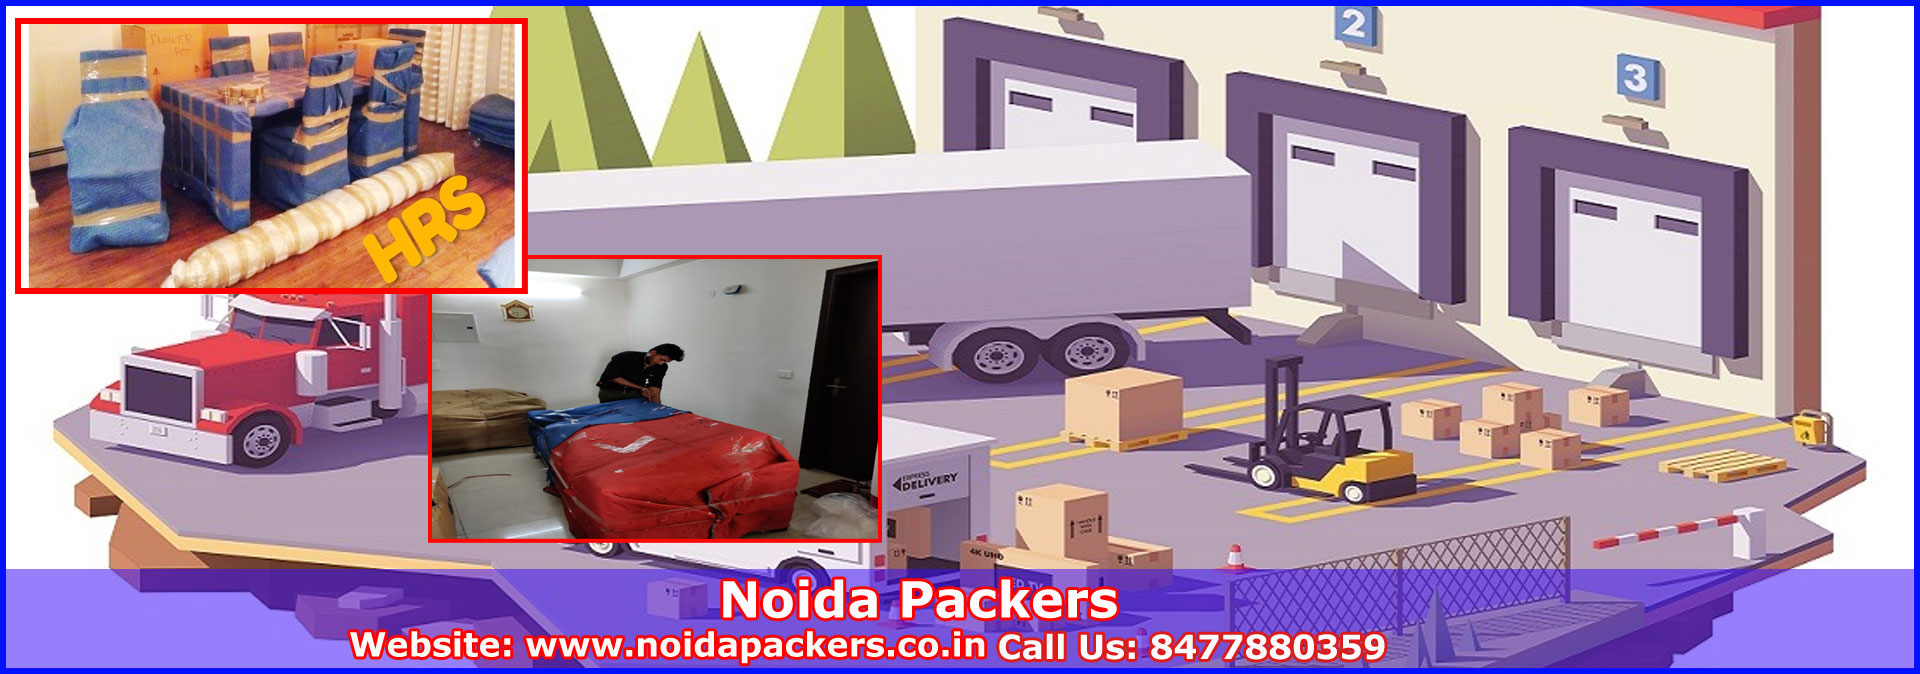 Movers ande Packers Noida Sector 17